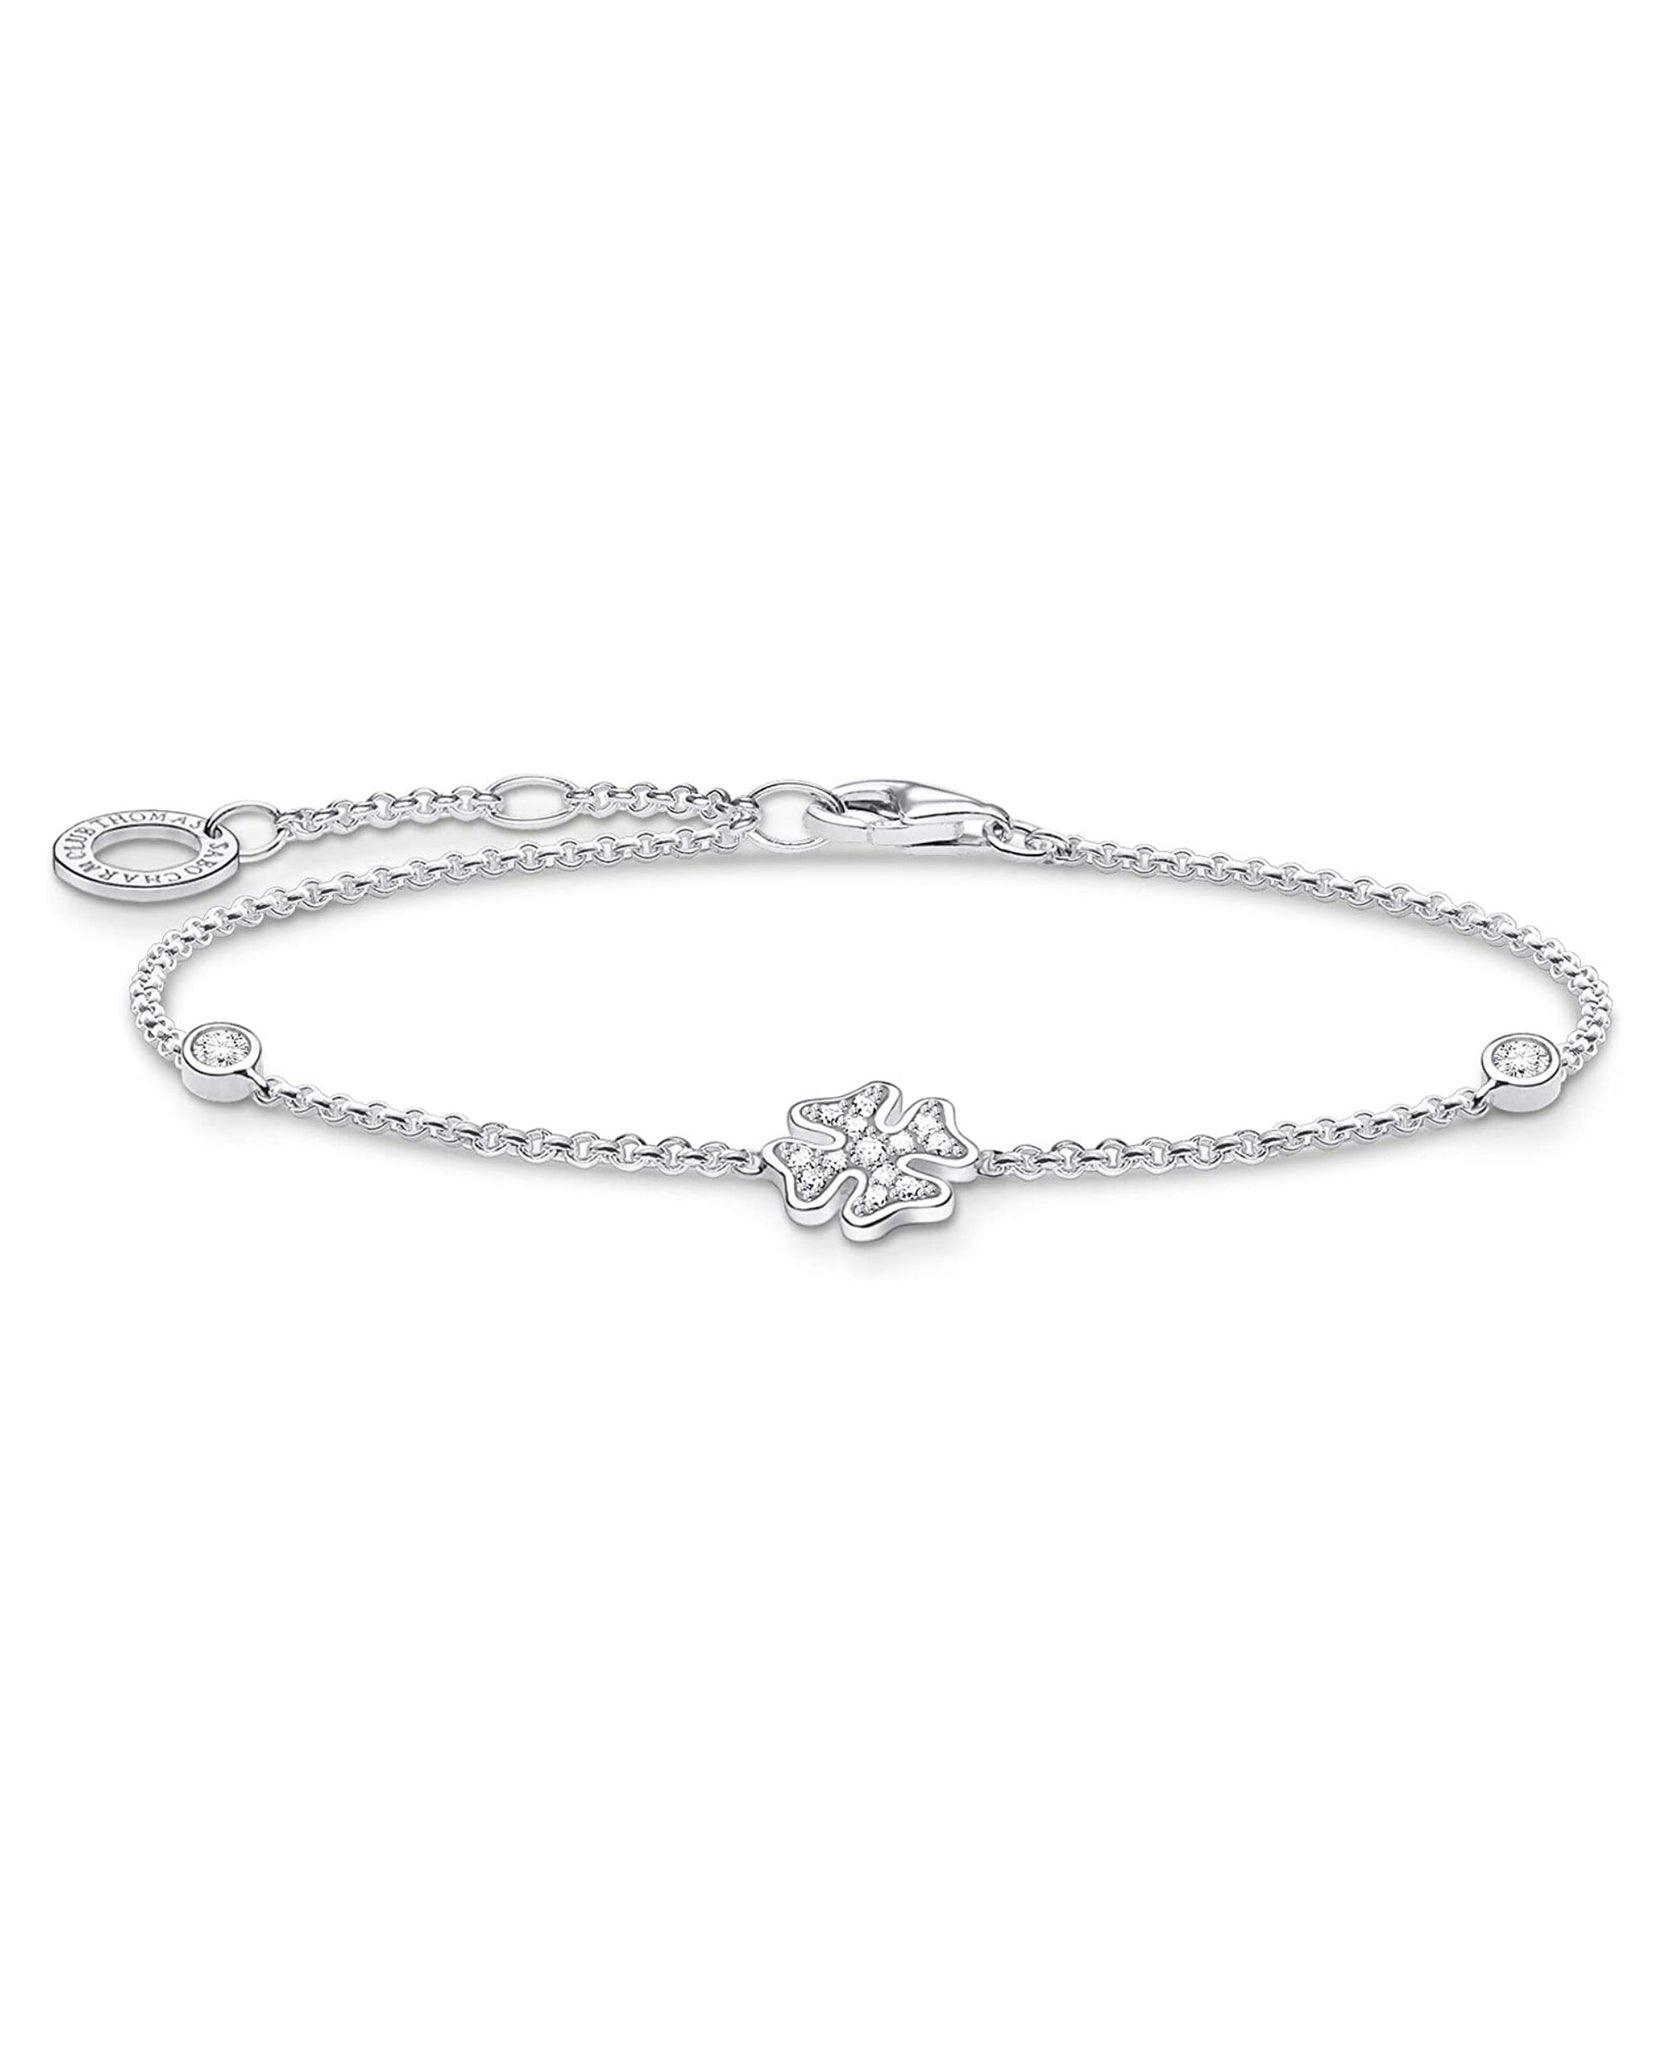 Thomas Sabo Sterling Silver Clover Bracelet with Stones